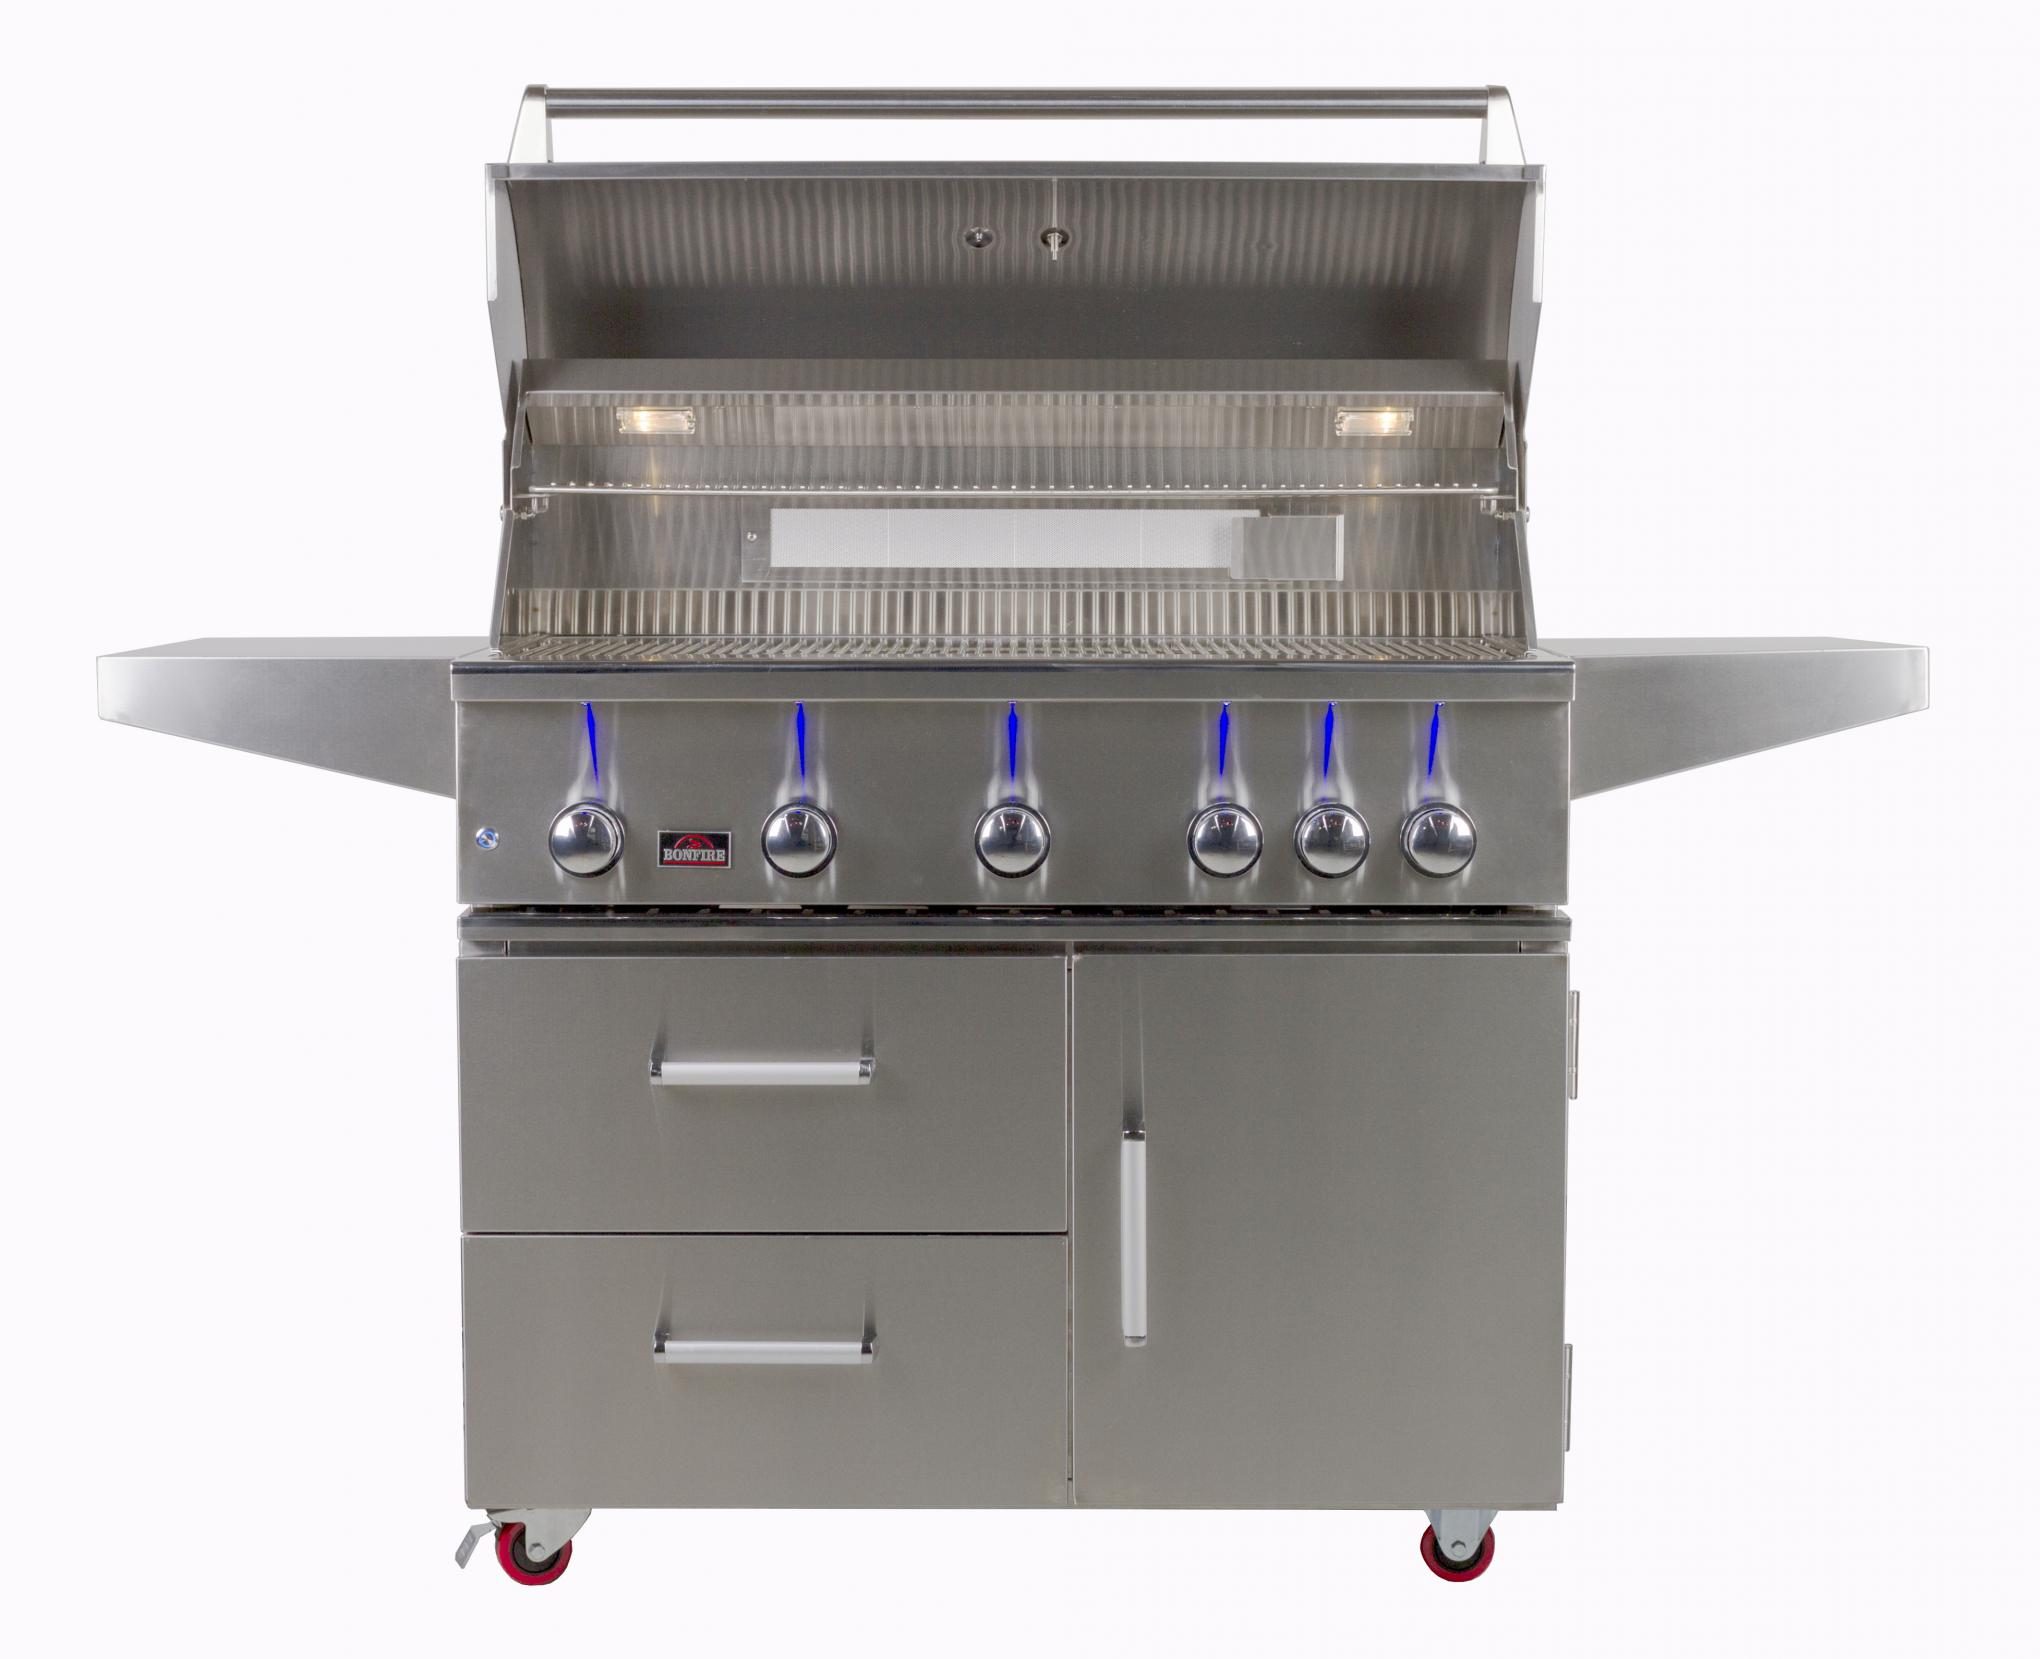 Bonfire 42" Premium Propane Grill on a Cart, Stainless Steel